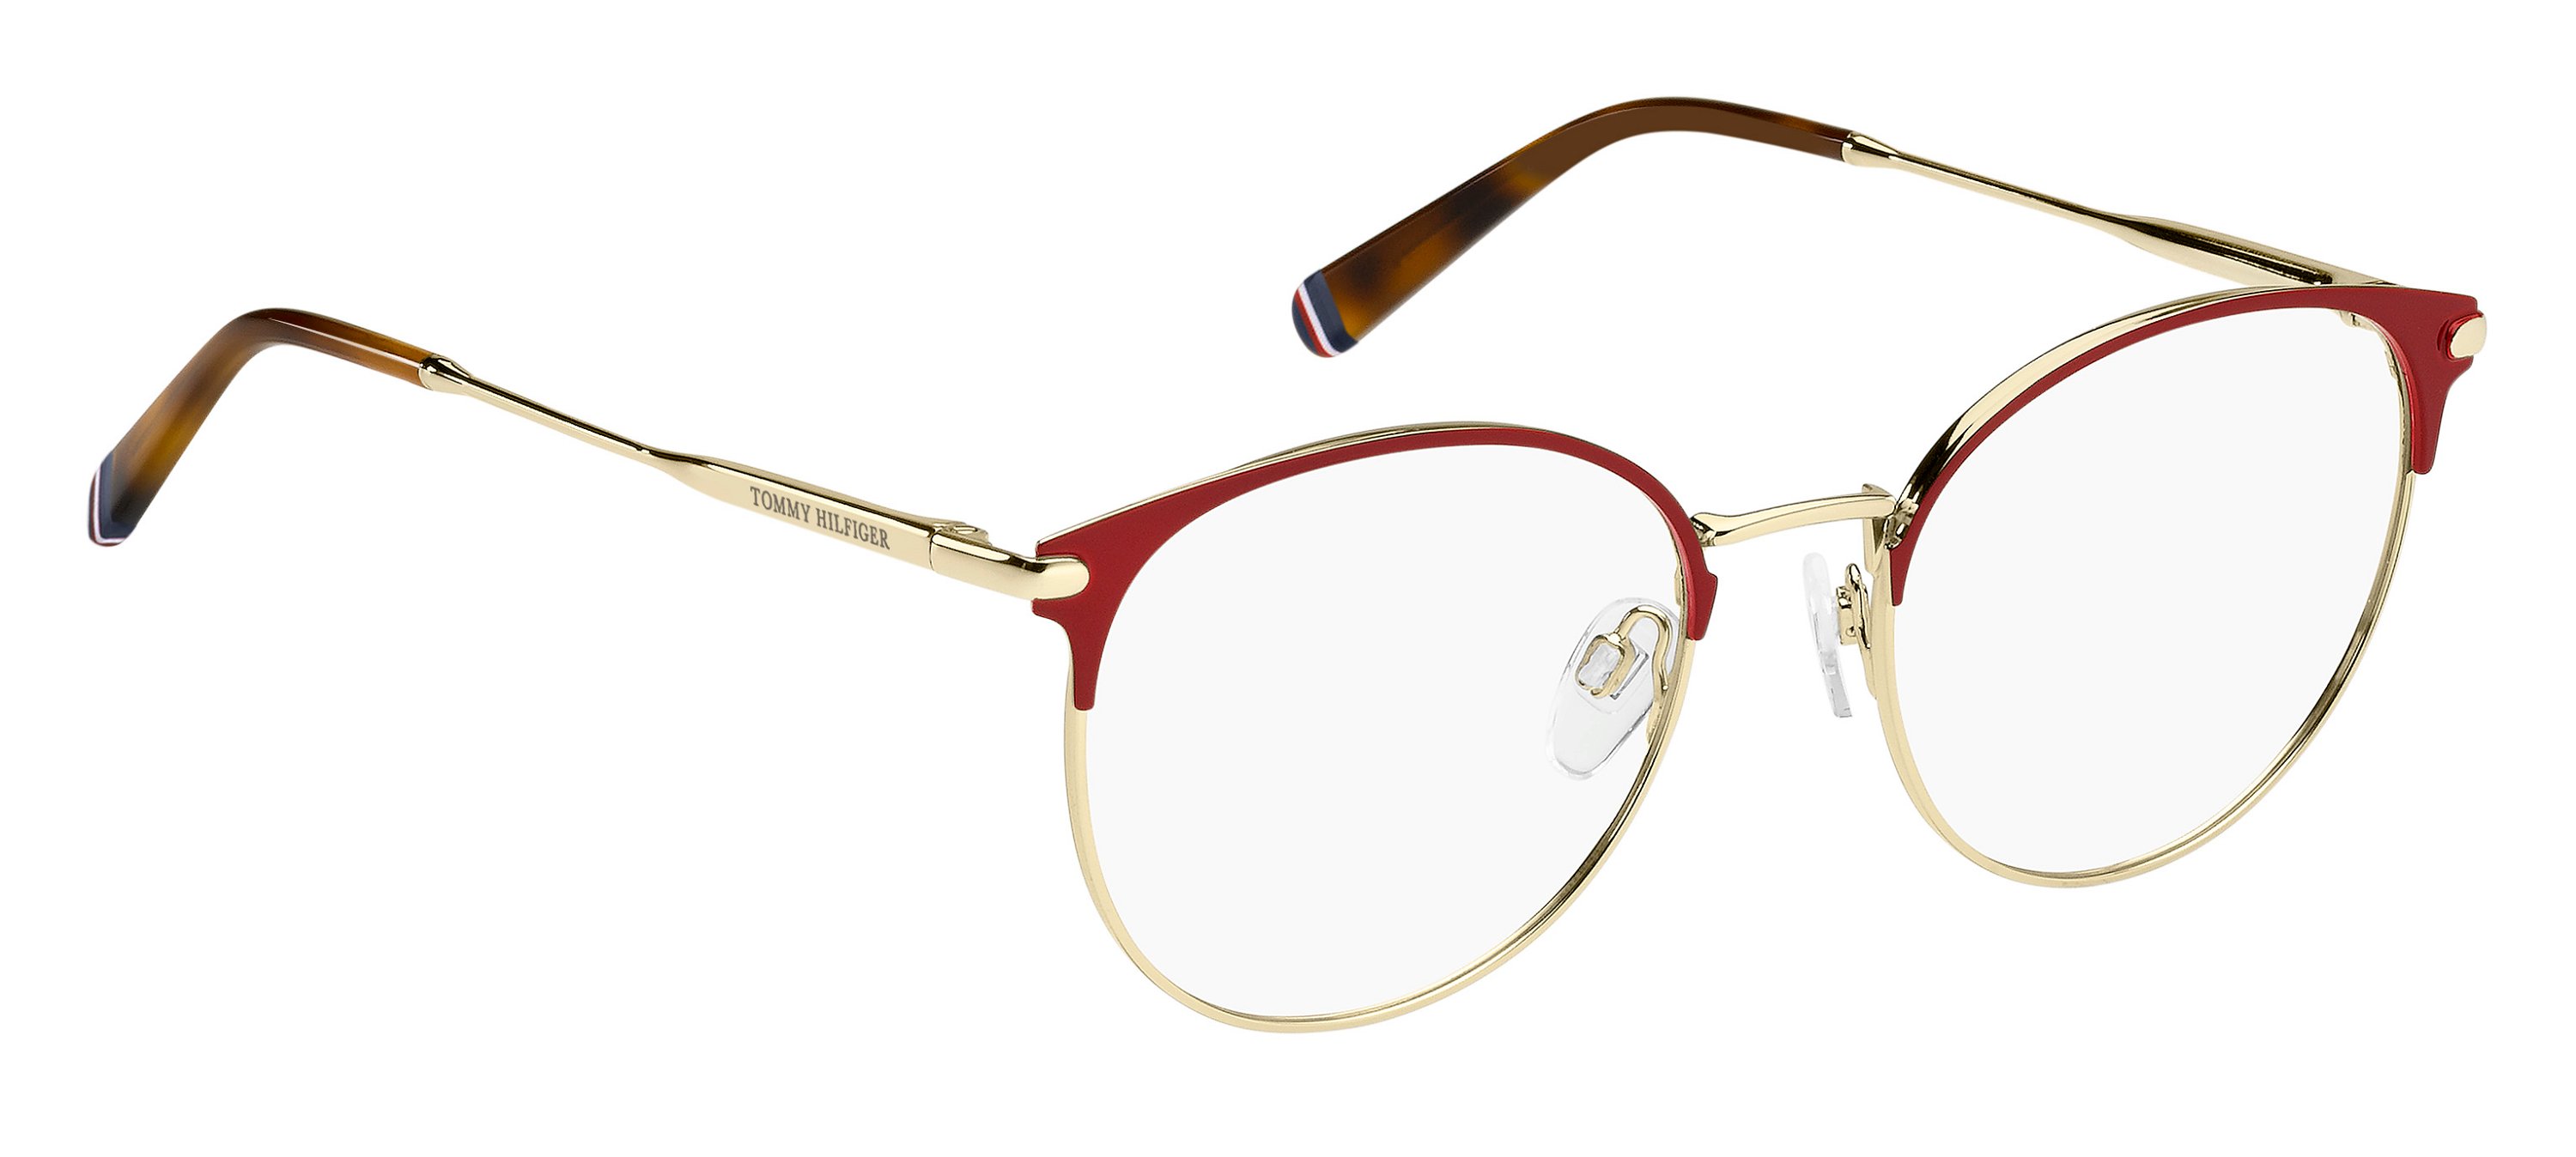 Tommy Hilfiger Brille TH1959 AU2 52 rot/gold